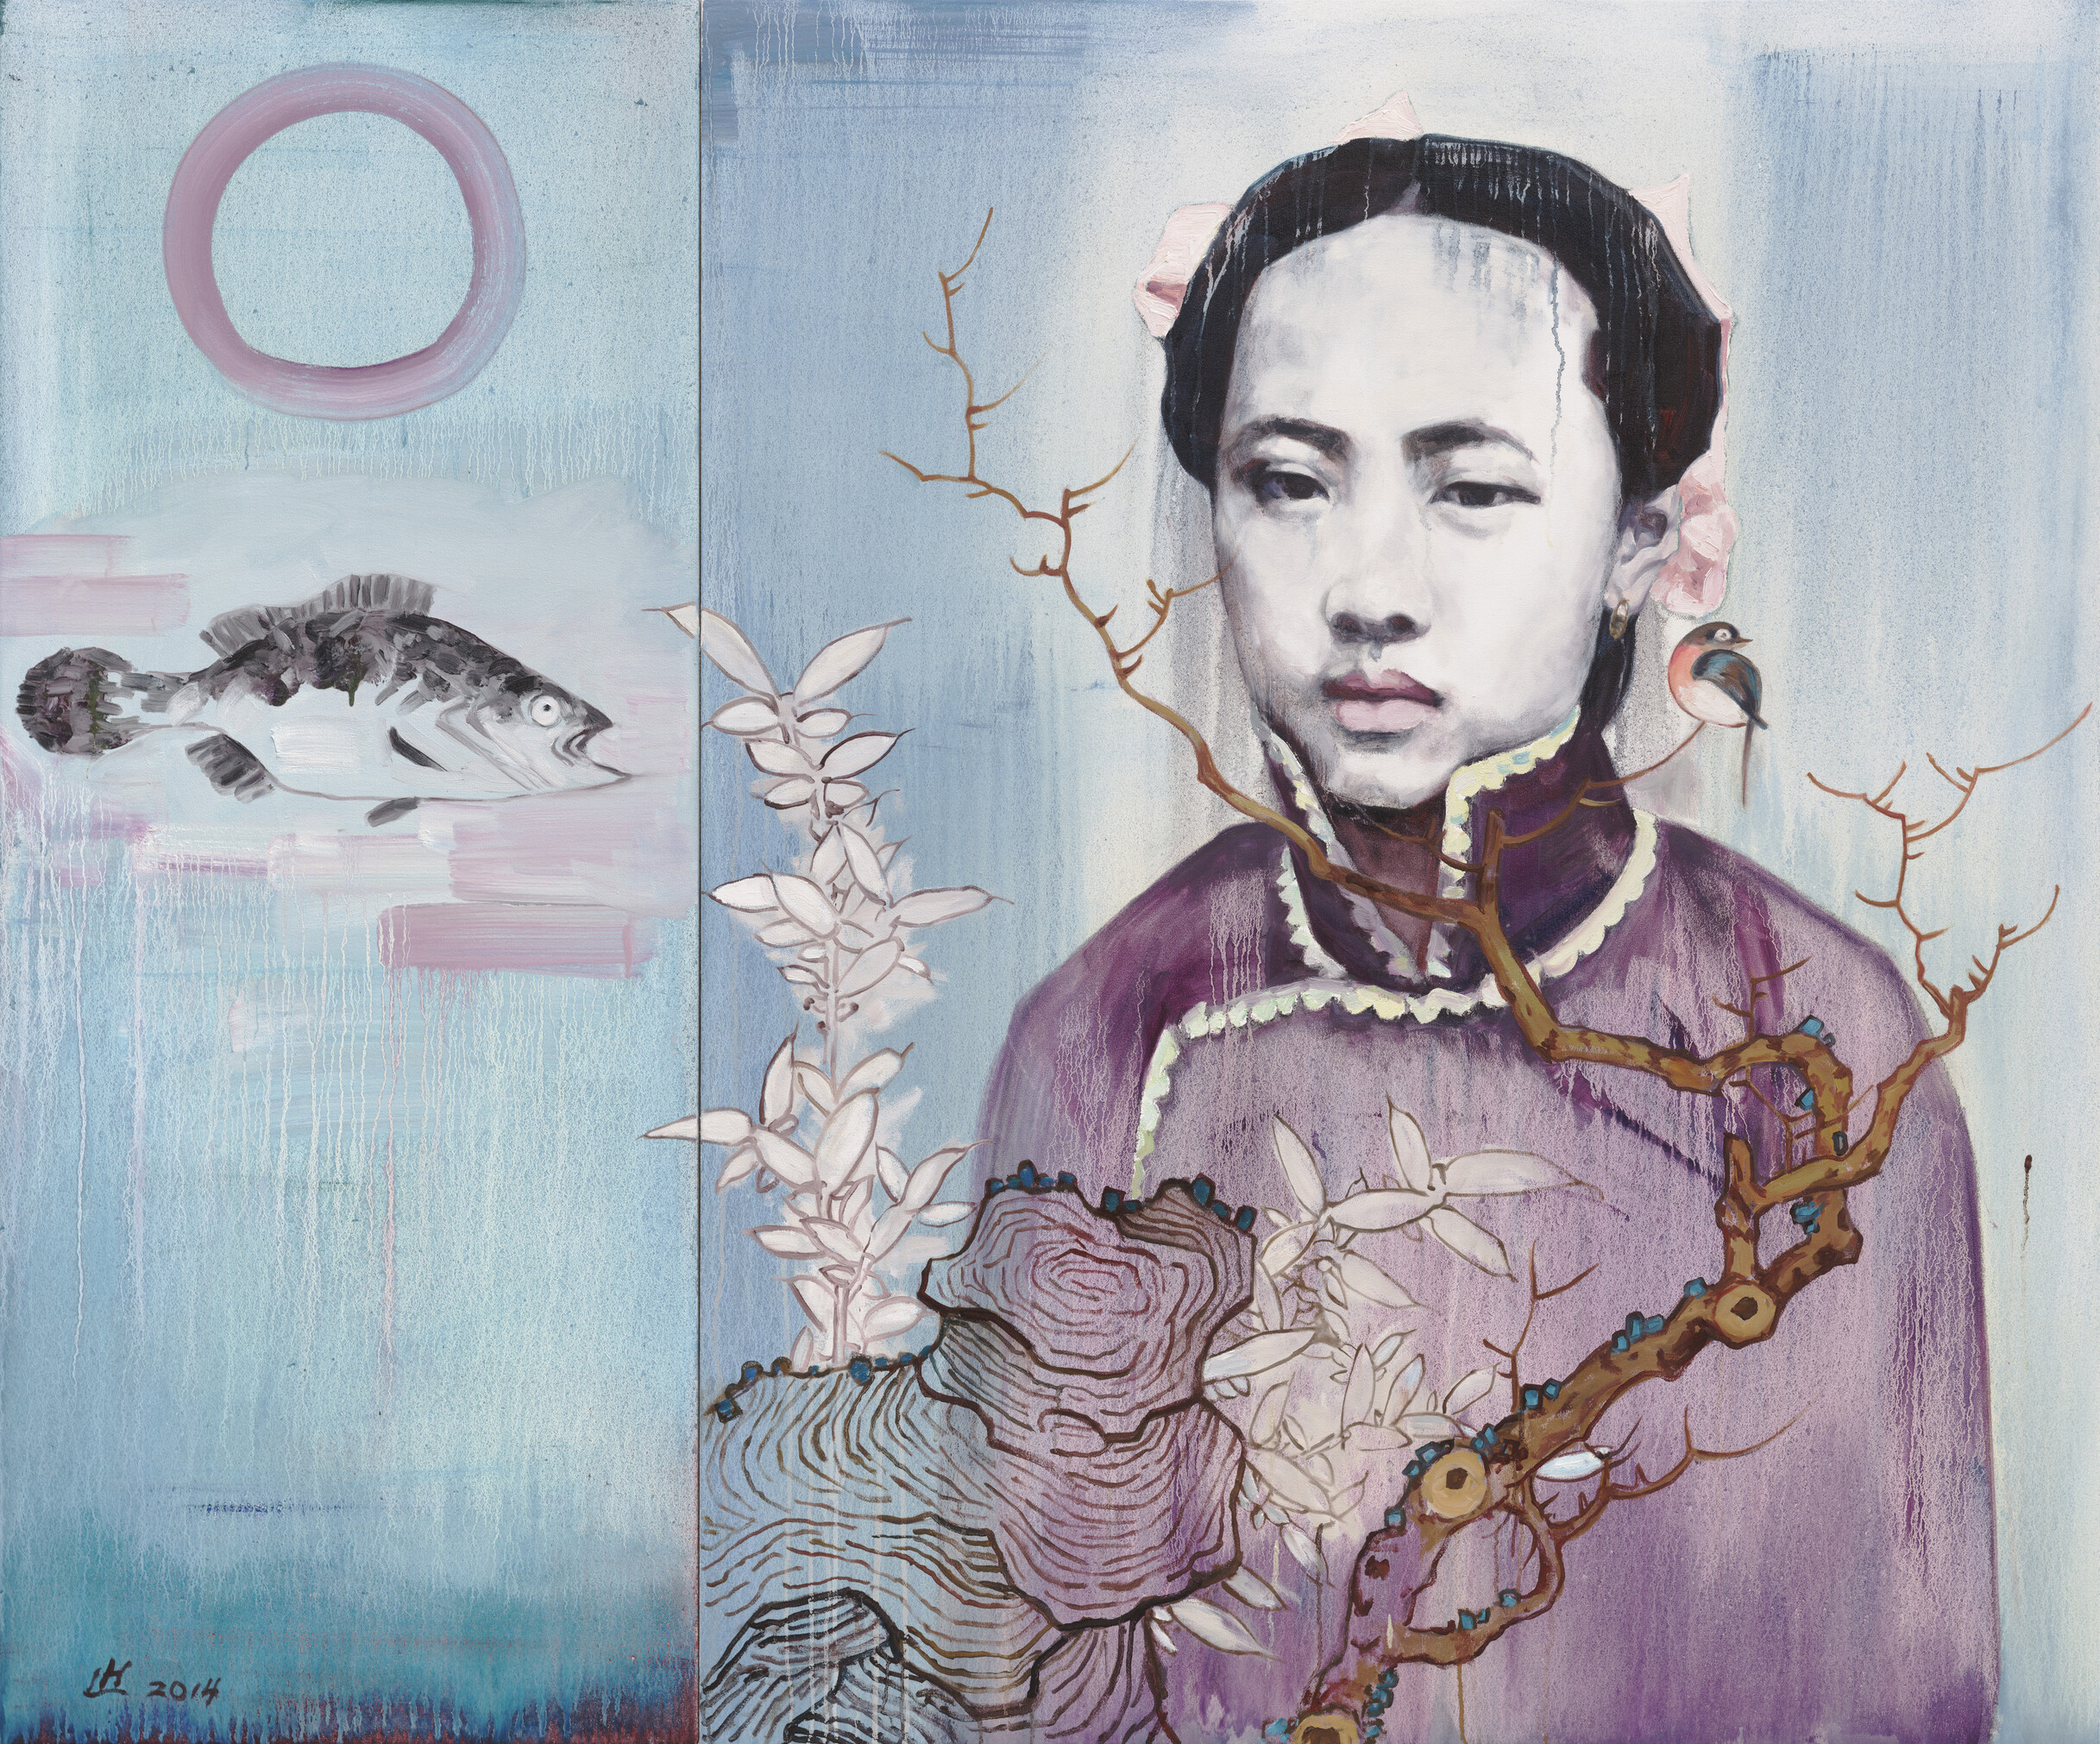 A square painting with layered, dripping textures of a Chinese woman with dark hair and a traditional dress. She gazes straightforward at the viewer. In front of her, a tree branch extends upward and a bird perches on the end of it. The background consists of two different shades of blue and on the left side of the canvas an open-mouthed fish points towards the woman.